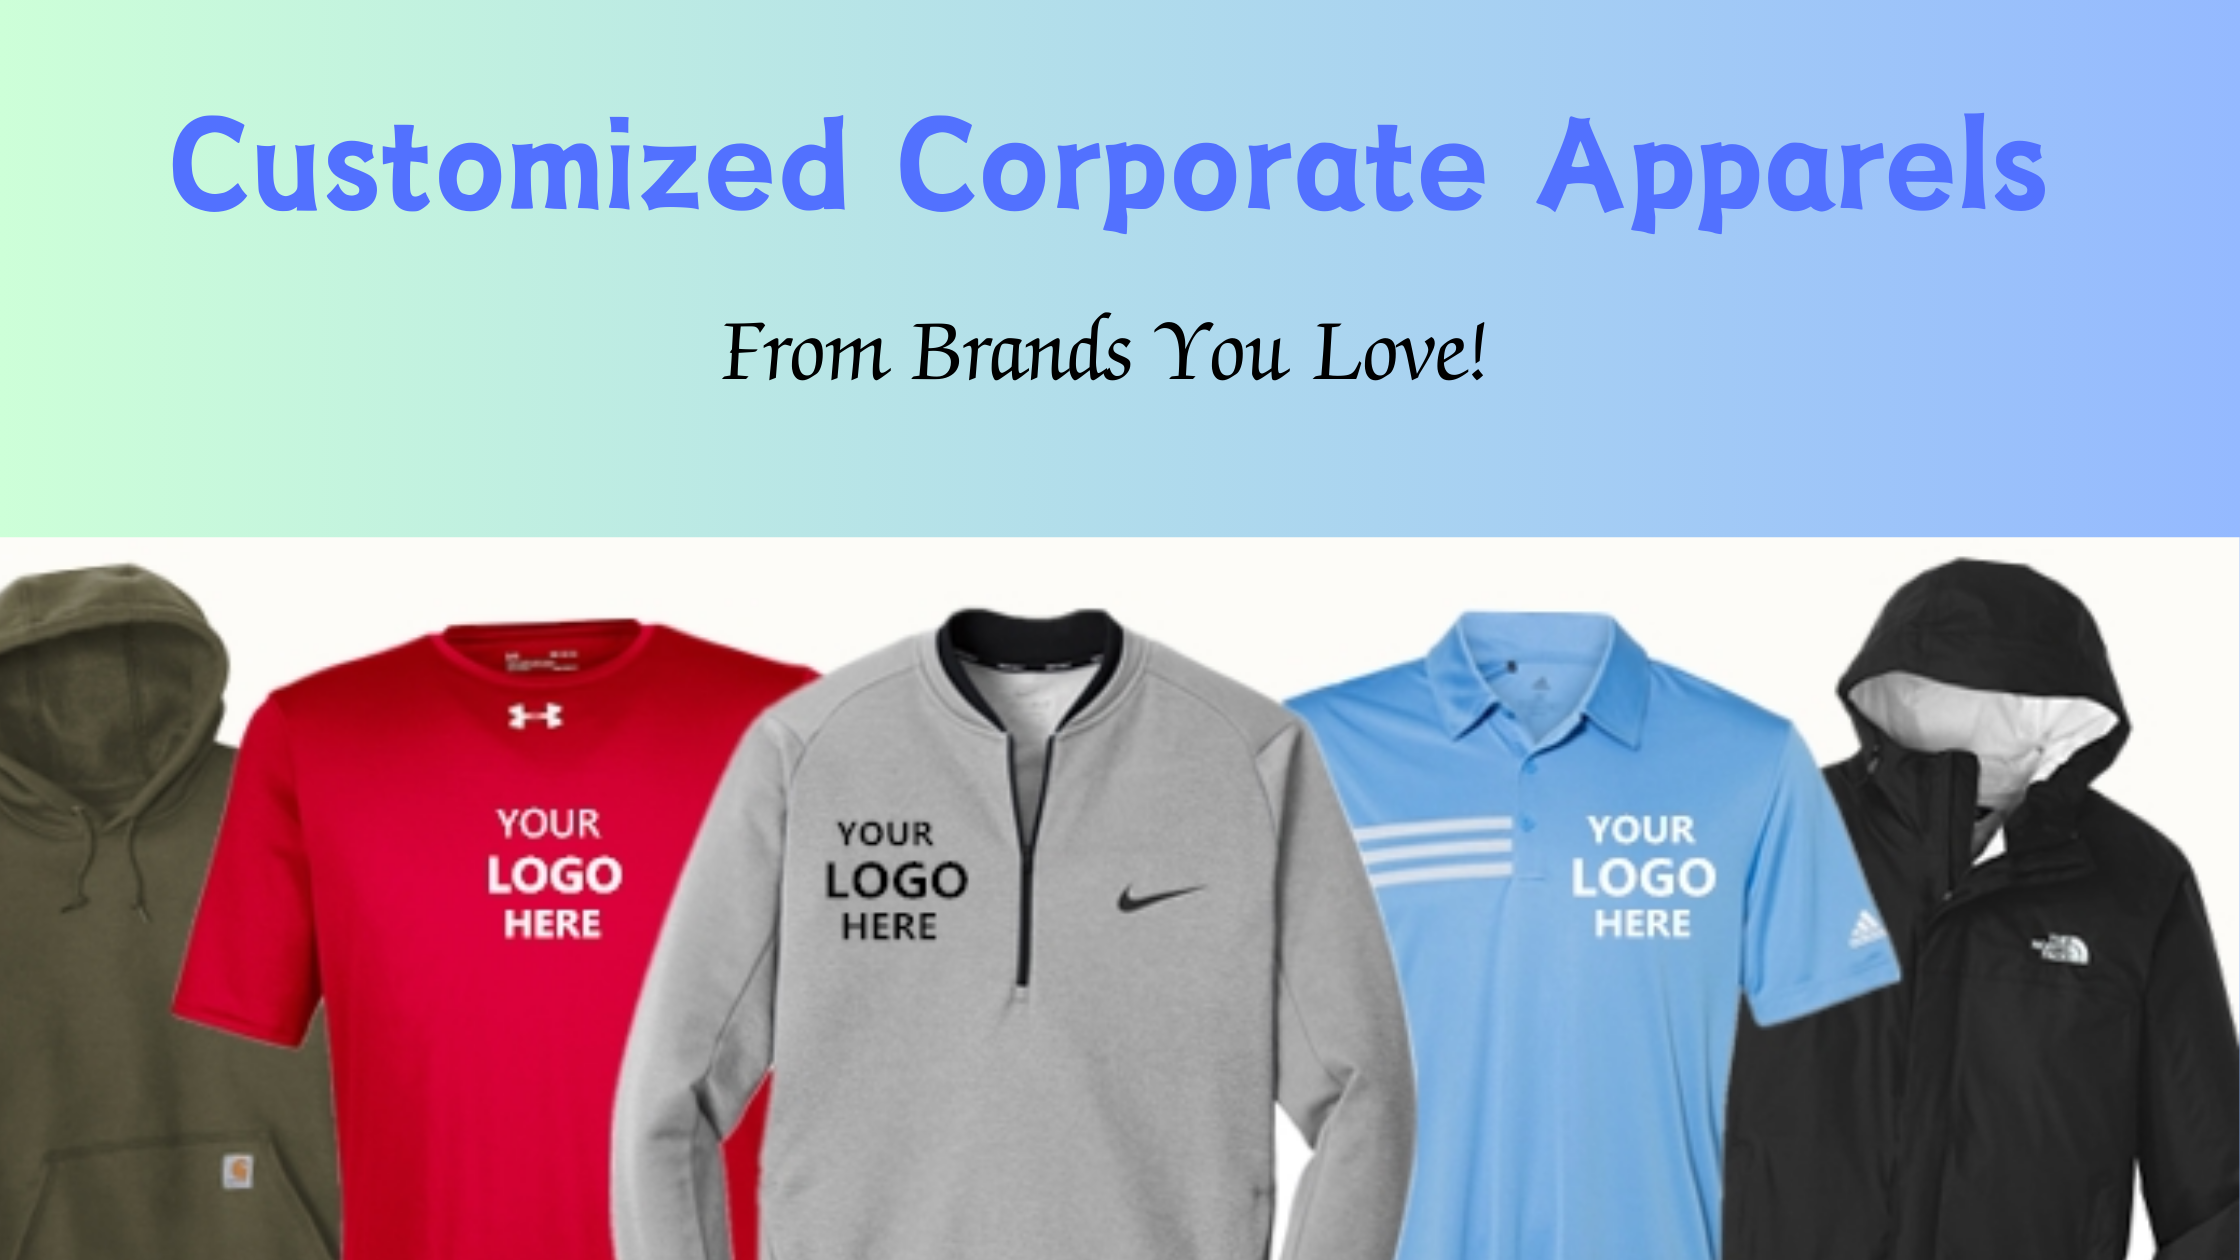 Apparels for Corporate Gifting